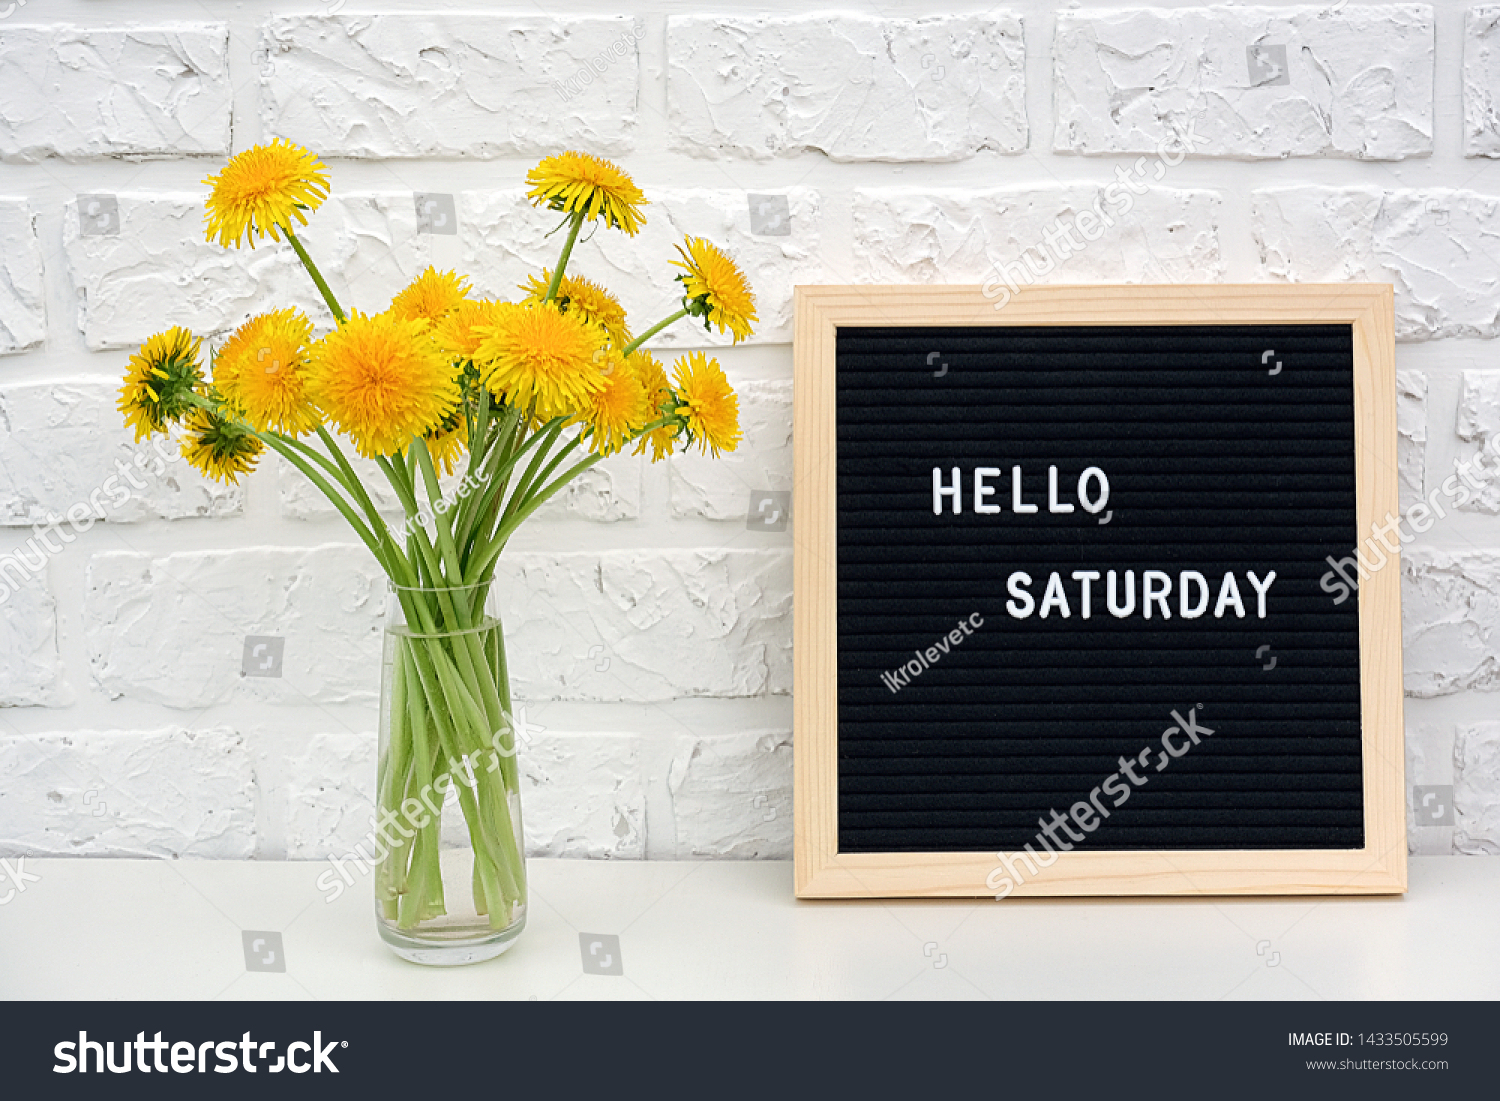 Hello Saturday words on black letter board and bouquet of yellow dandelions flowers on table against white brick wall. Concept Happy Saturday. Template for postcard. #1433505599